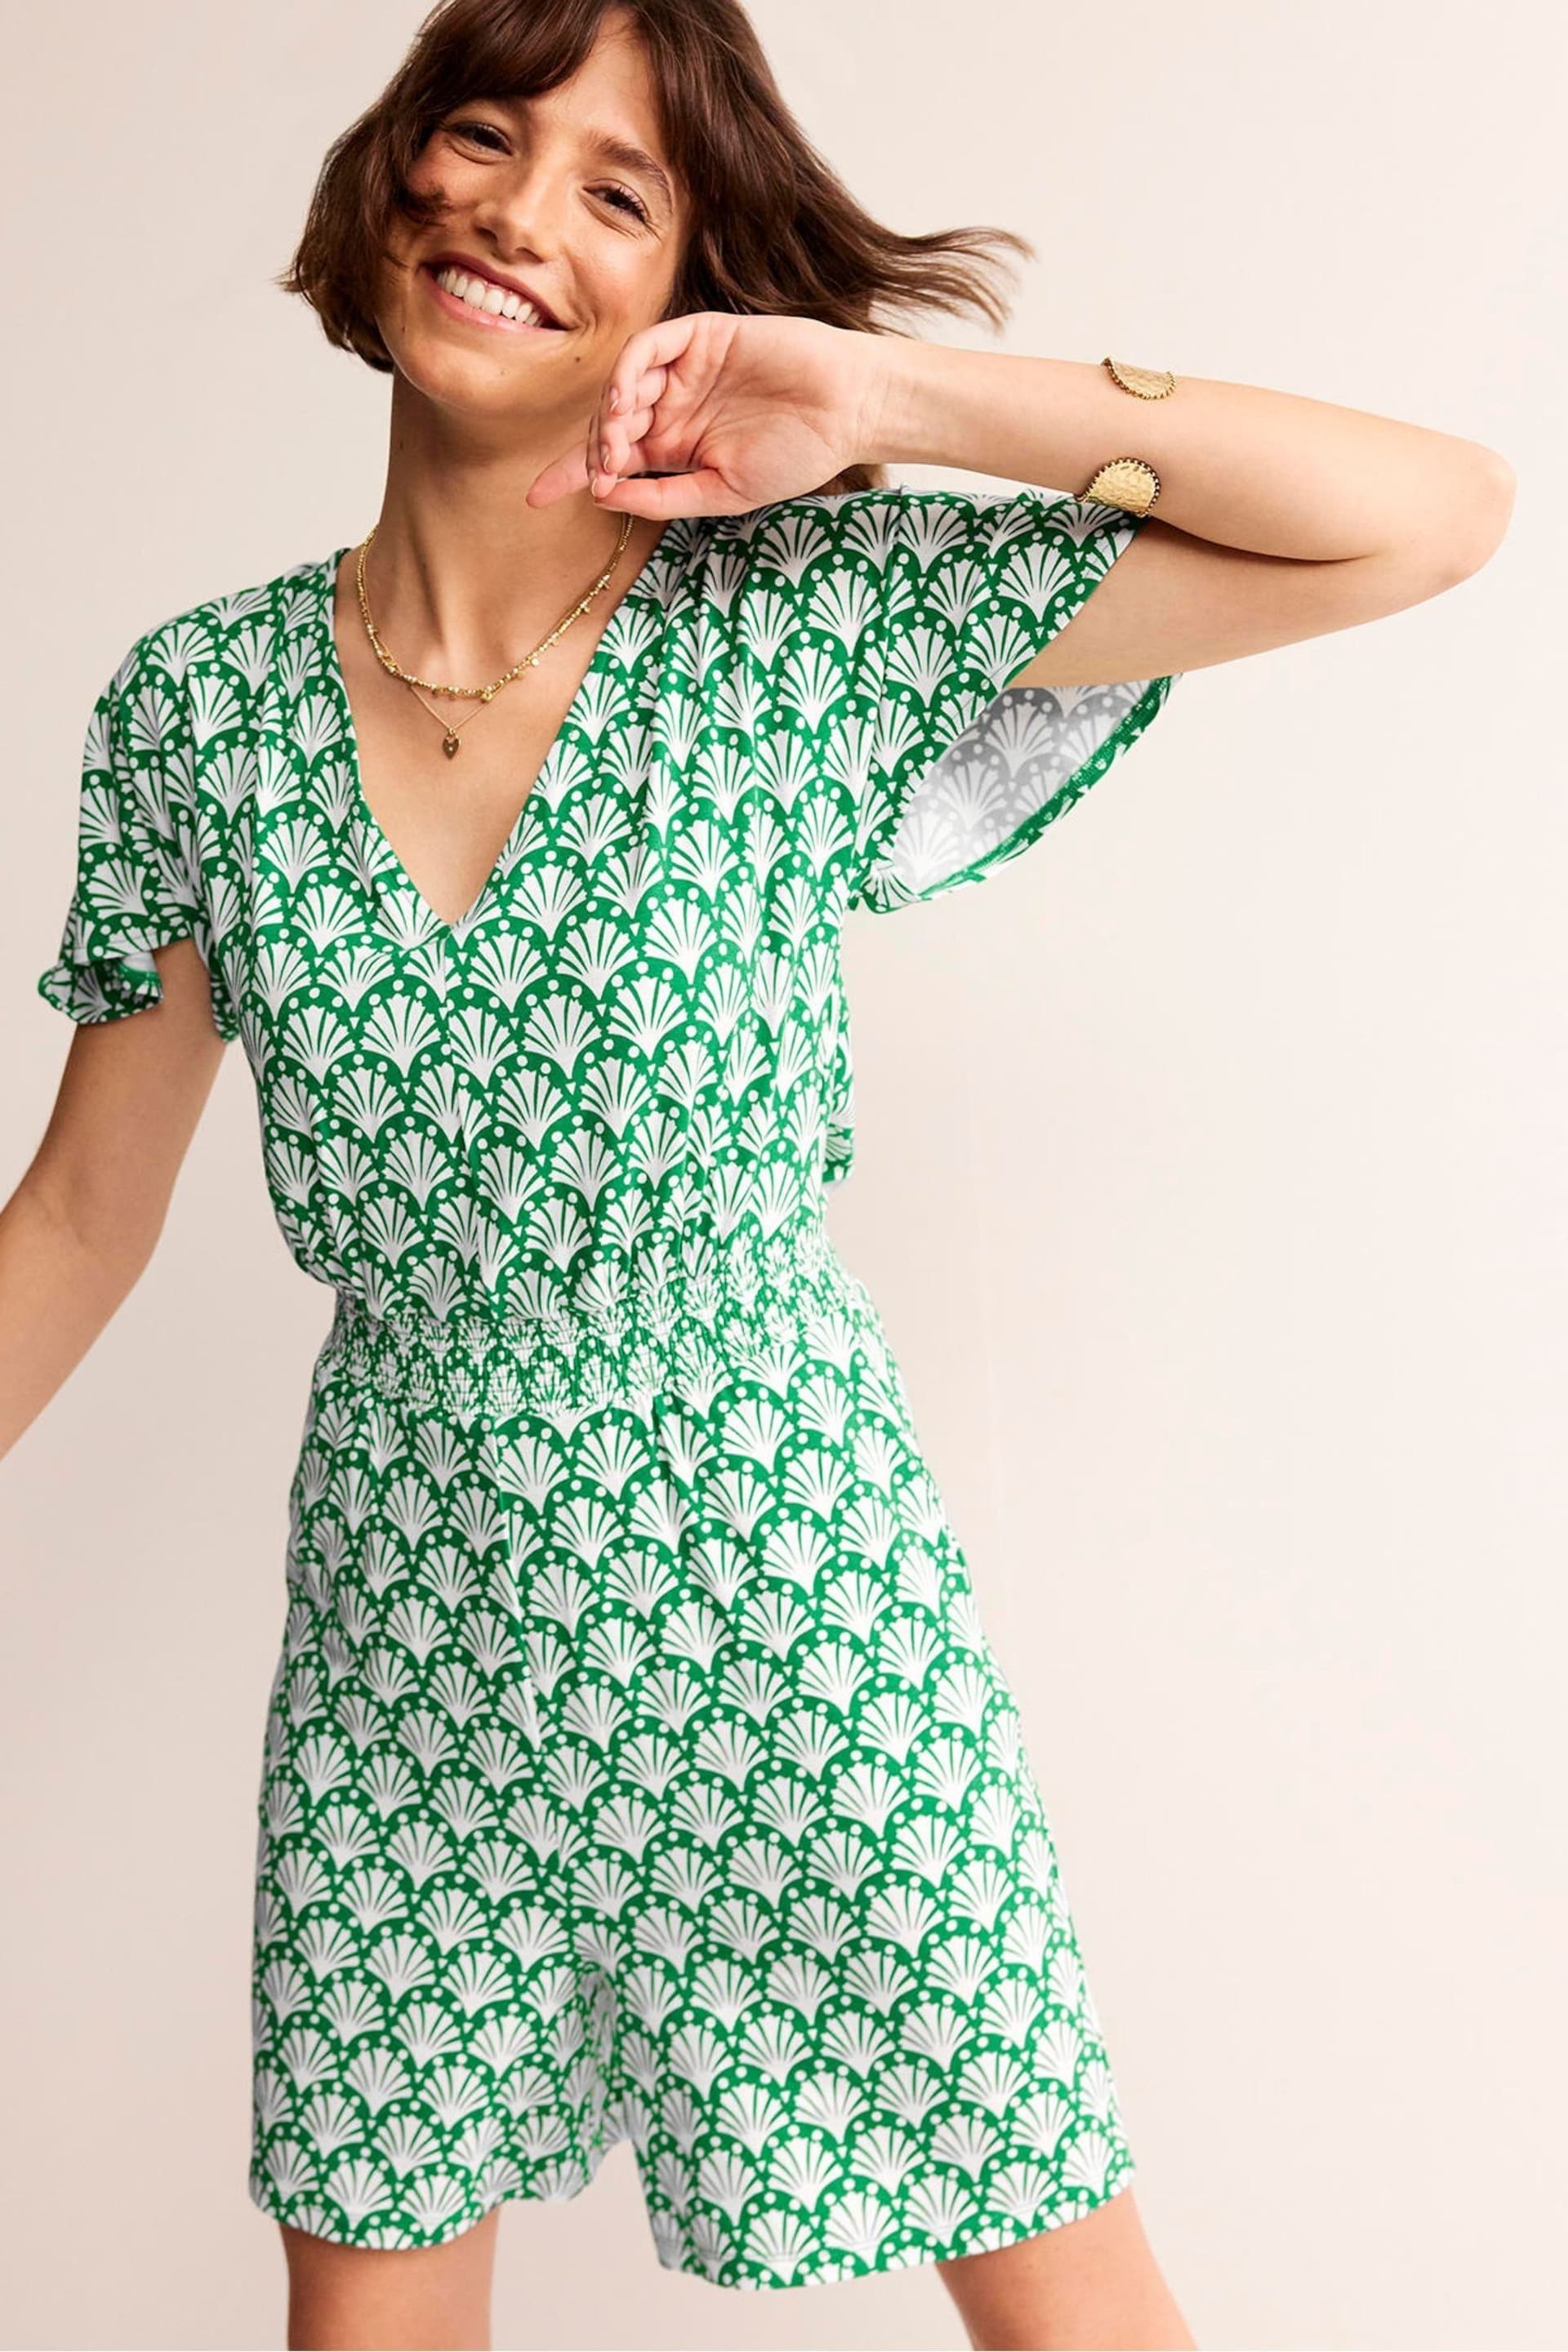 Boden Green Smocked Jersey Playsuit - Image 1 of 5